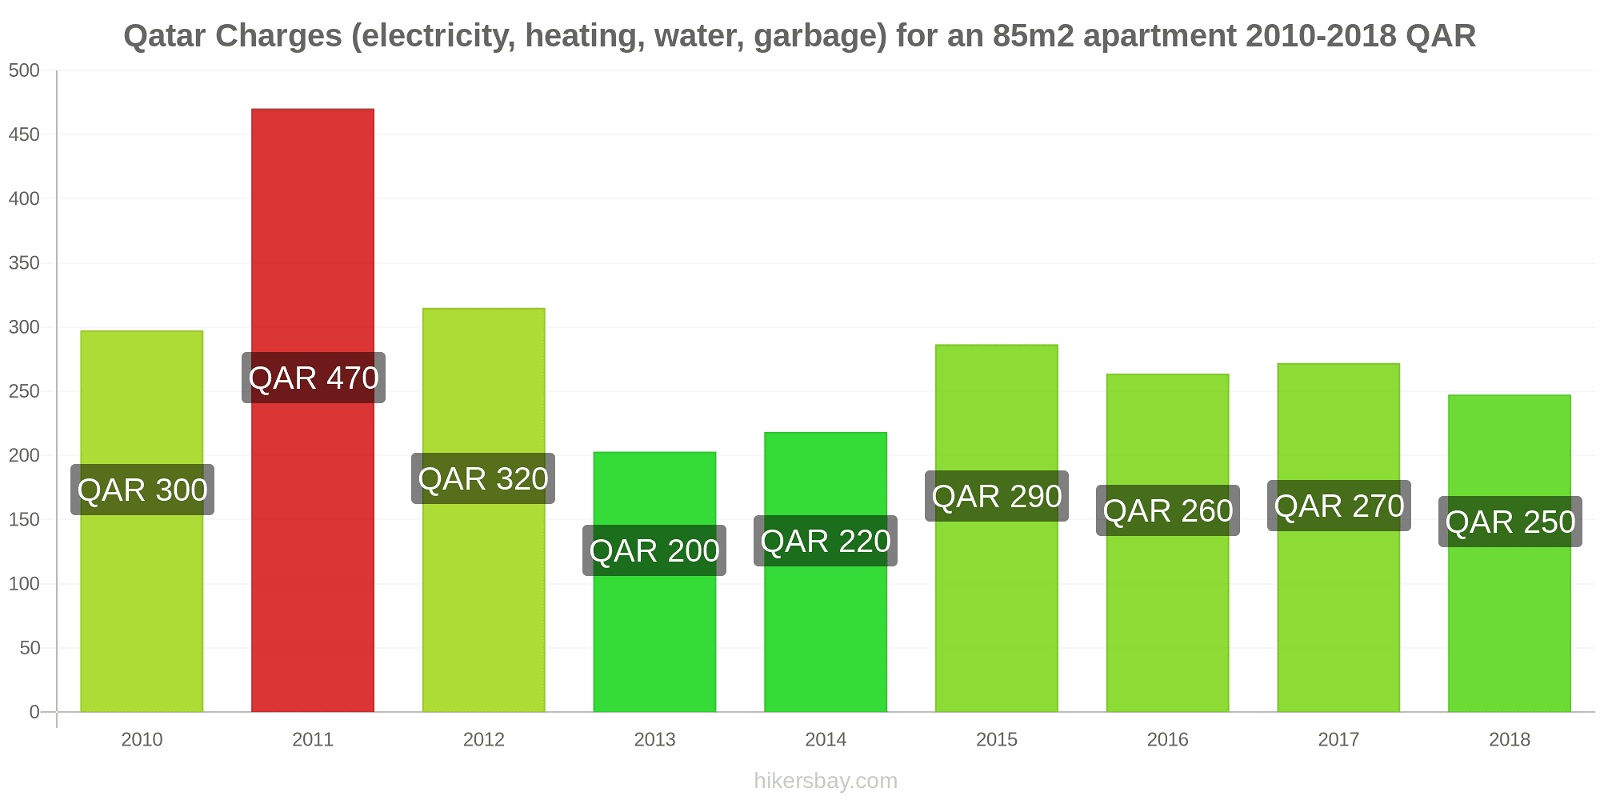 Qatar price changes Utilities (electricity, heating, water, garbage) for an 85m2 apartment hikersbay.com